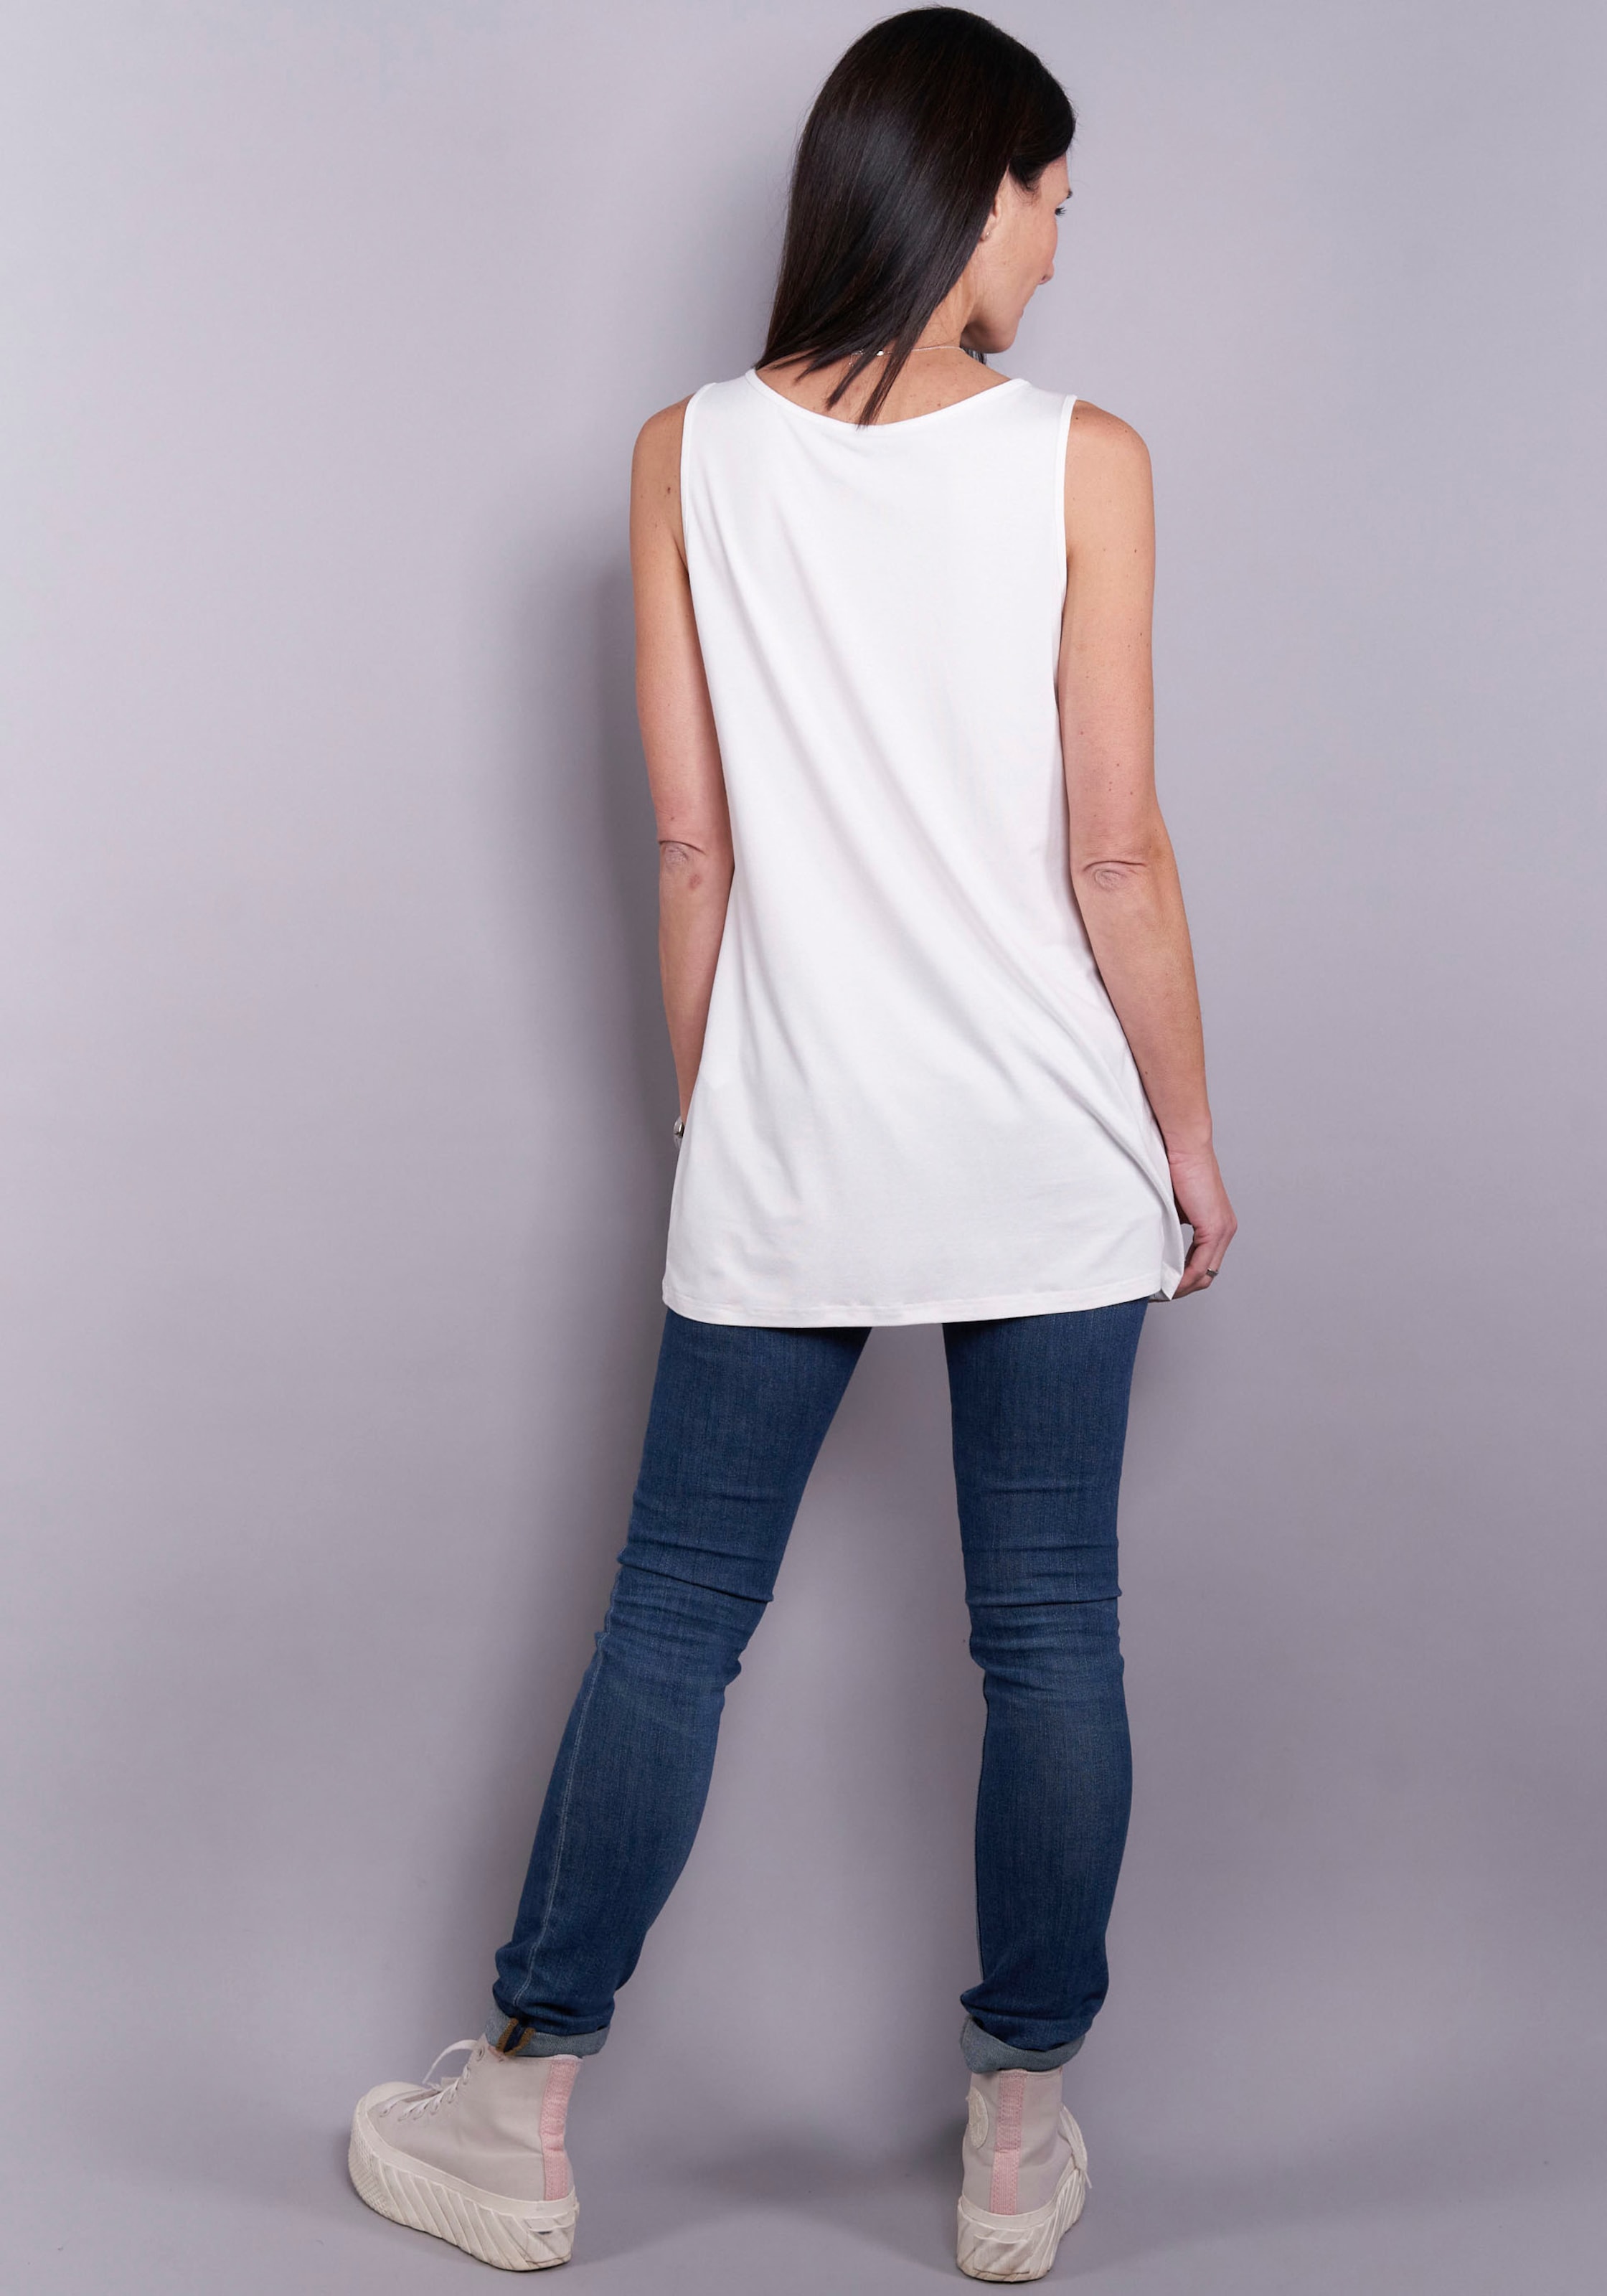 Top YOU ABOUT in Offwhite Moden | Seidel